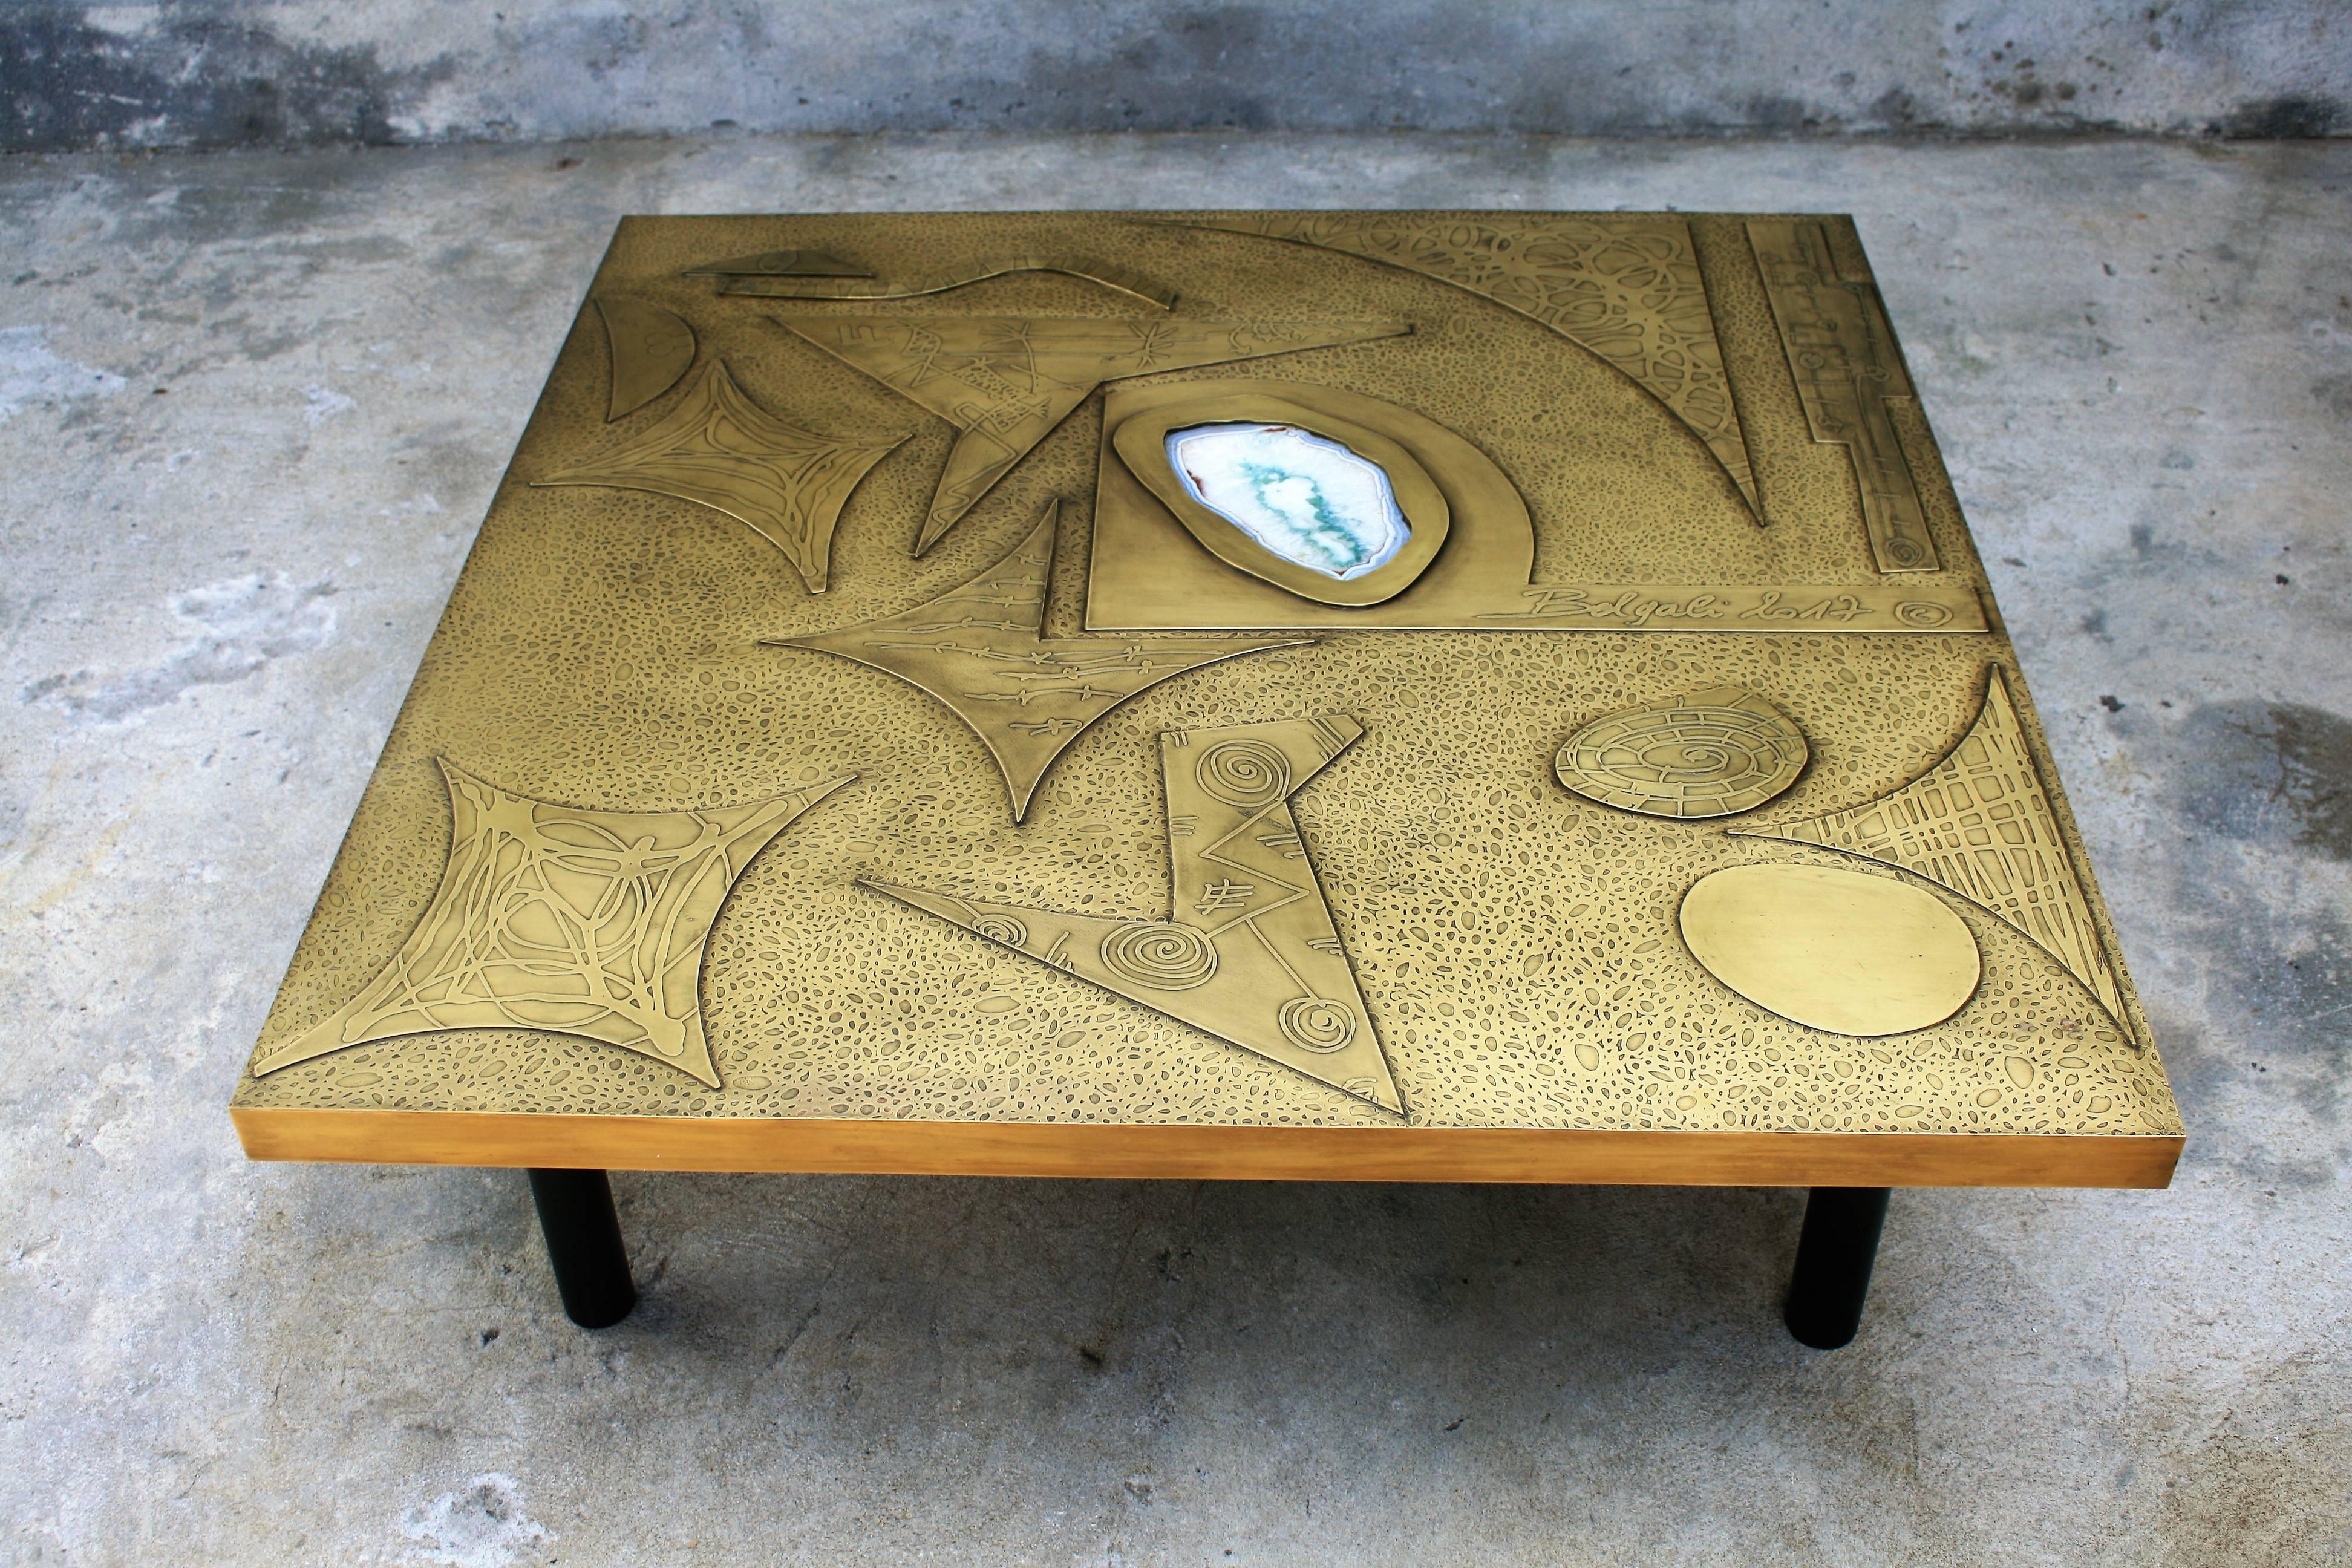 Belgali is a Belgian producer of brass handmade furniture. Mostly acid etched designes, finished with high quality rare semi precious gems. 

Brutalist square coffee table with agate stone slice inlay. They have been acid etched and patinated